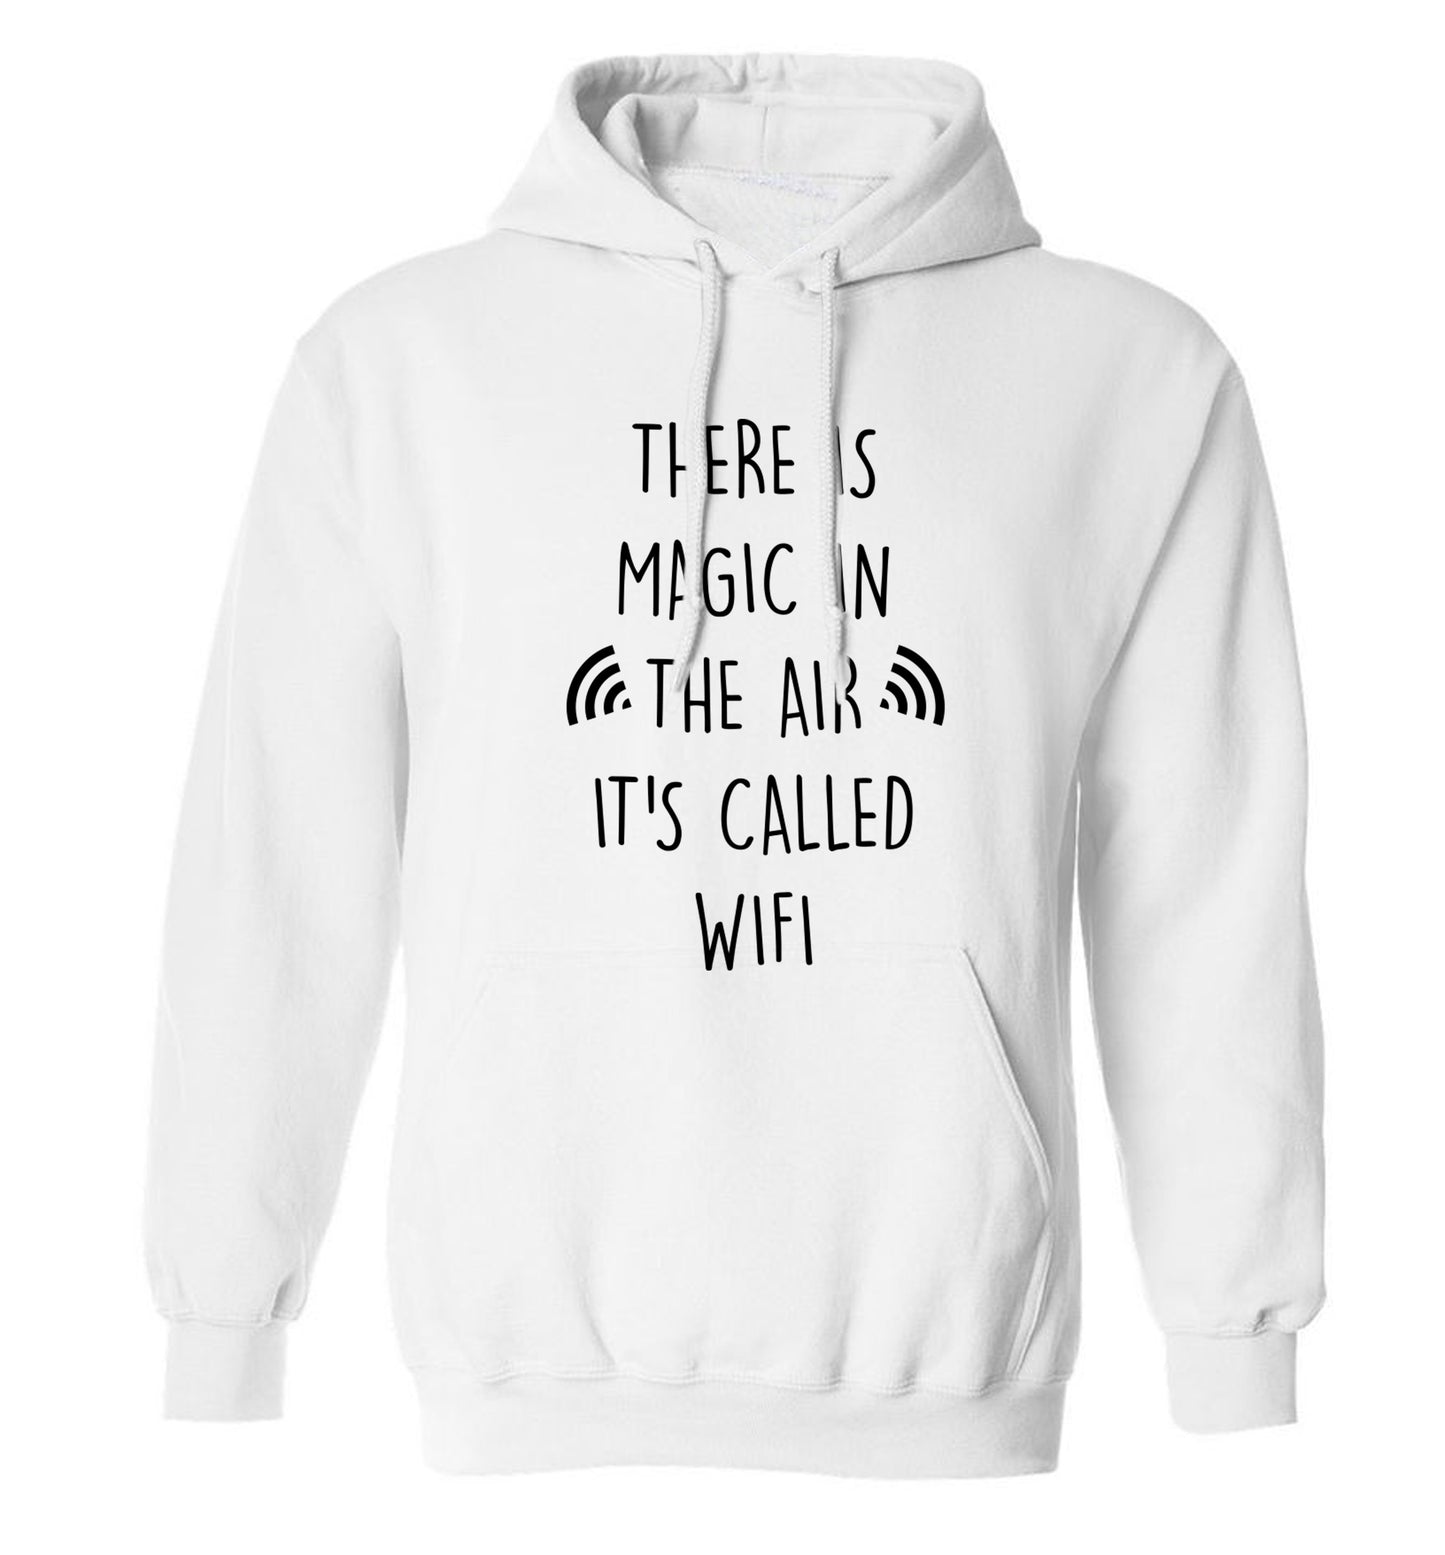 There is magic in the air it's called wifi adults unisex white hoodie 2XL